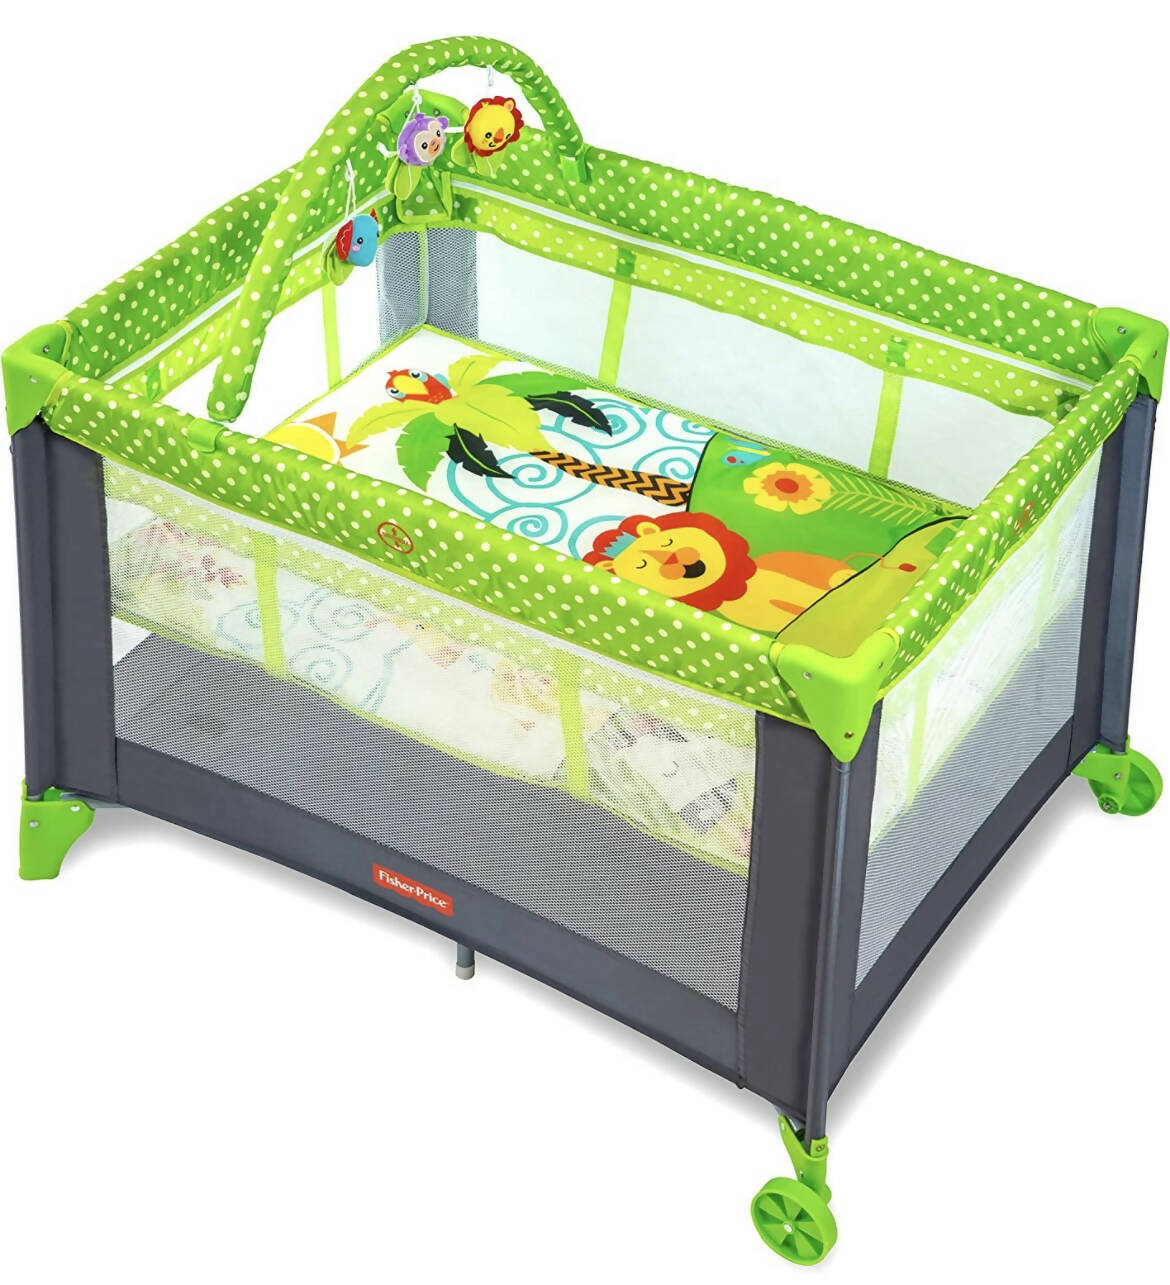 FISHER PRICE Portable Bed/Cot cum Playpen, Dimensions101L x 75W x 105H Cm - PyaraBaby